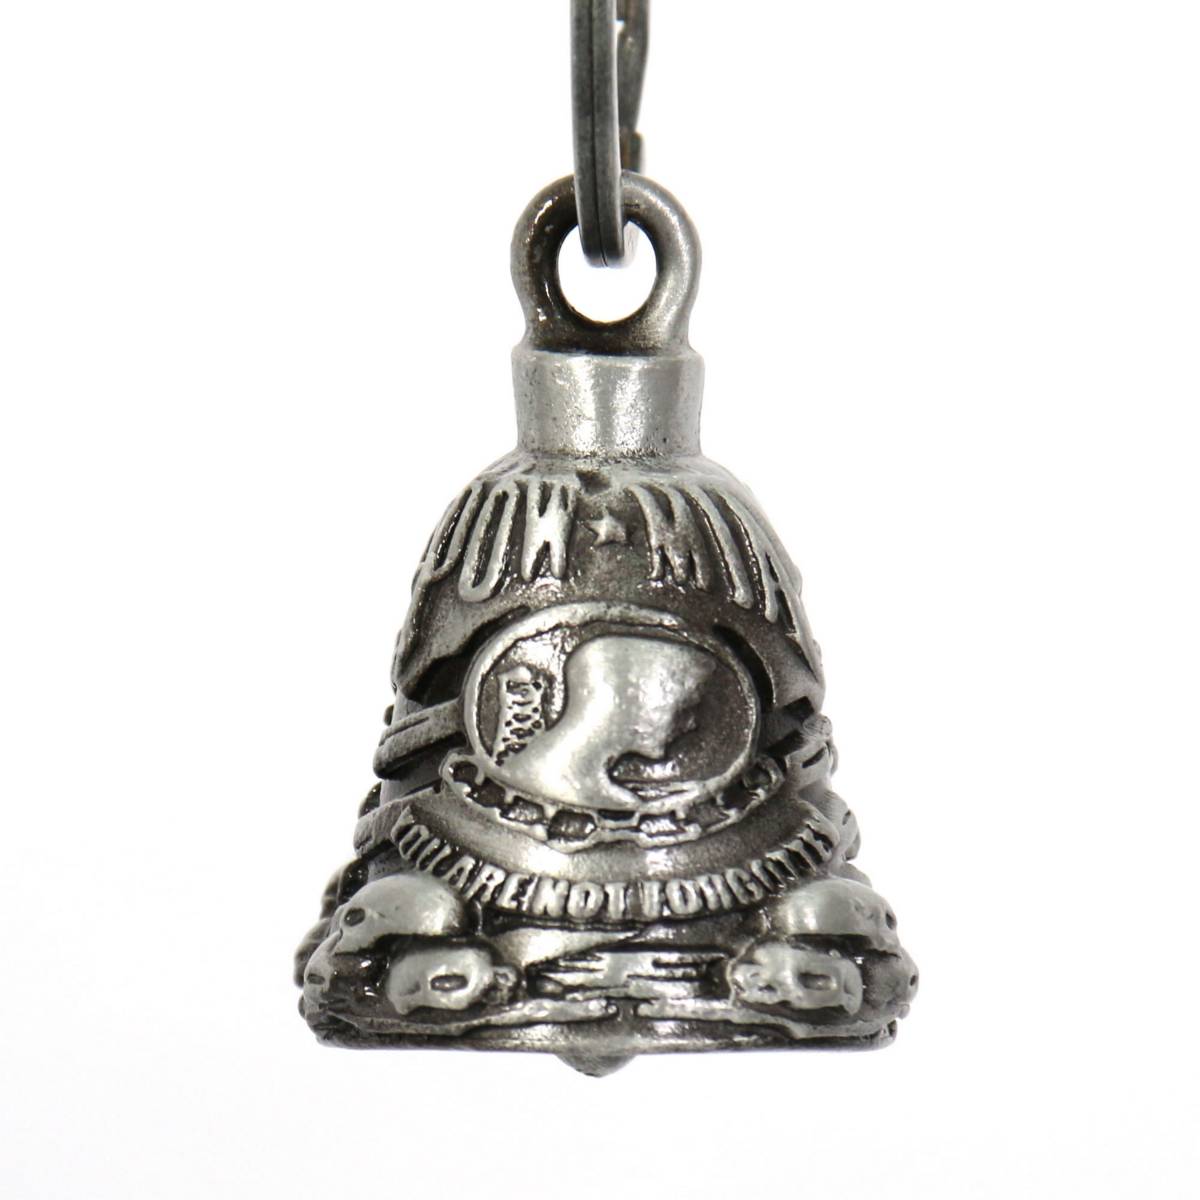 Milwaukee Leather MLB9049 'POW-MIA' Motorcycle Good Luck Bell | Key Chain Accessory for Bikers